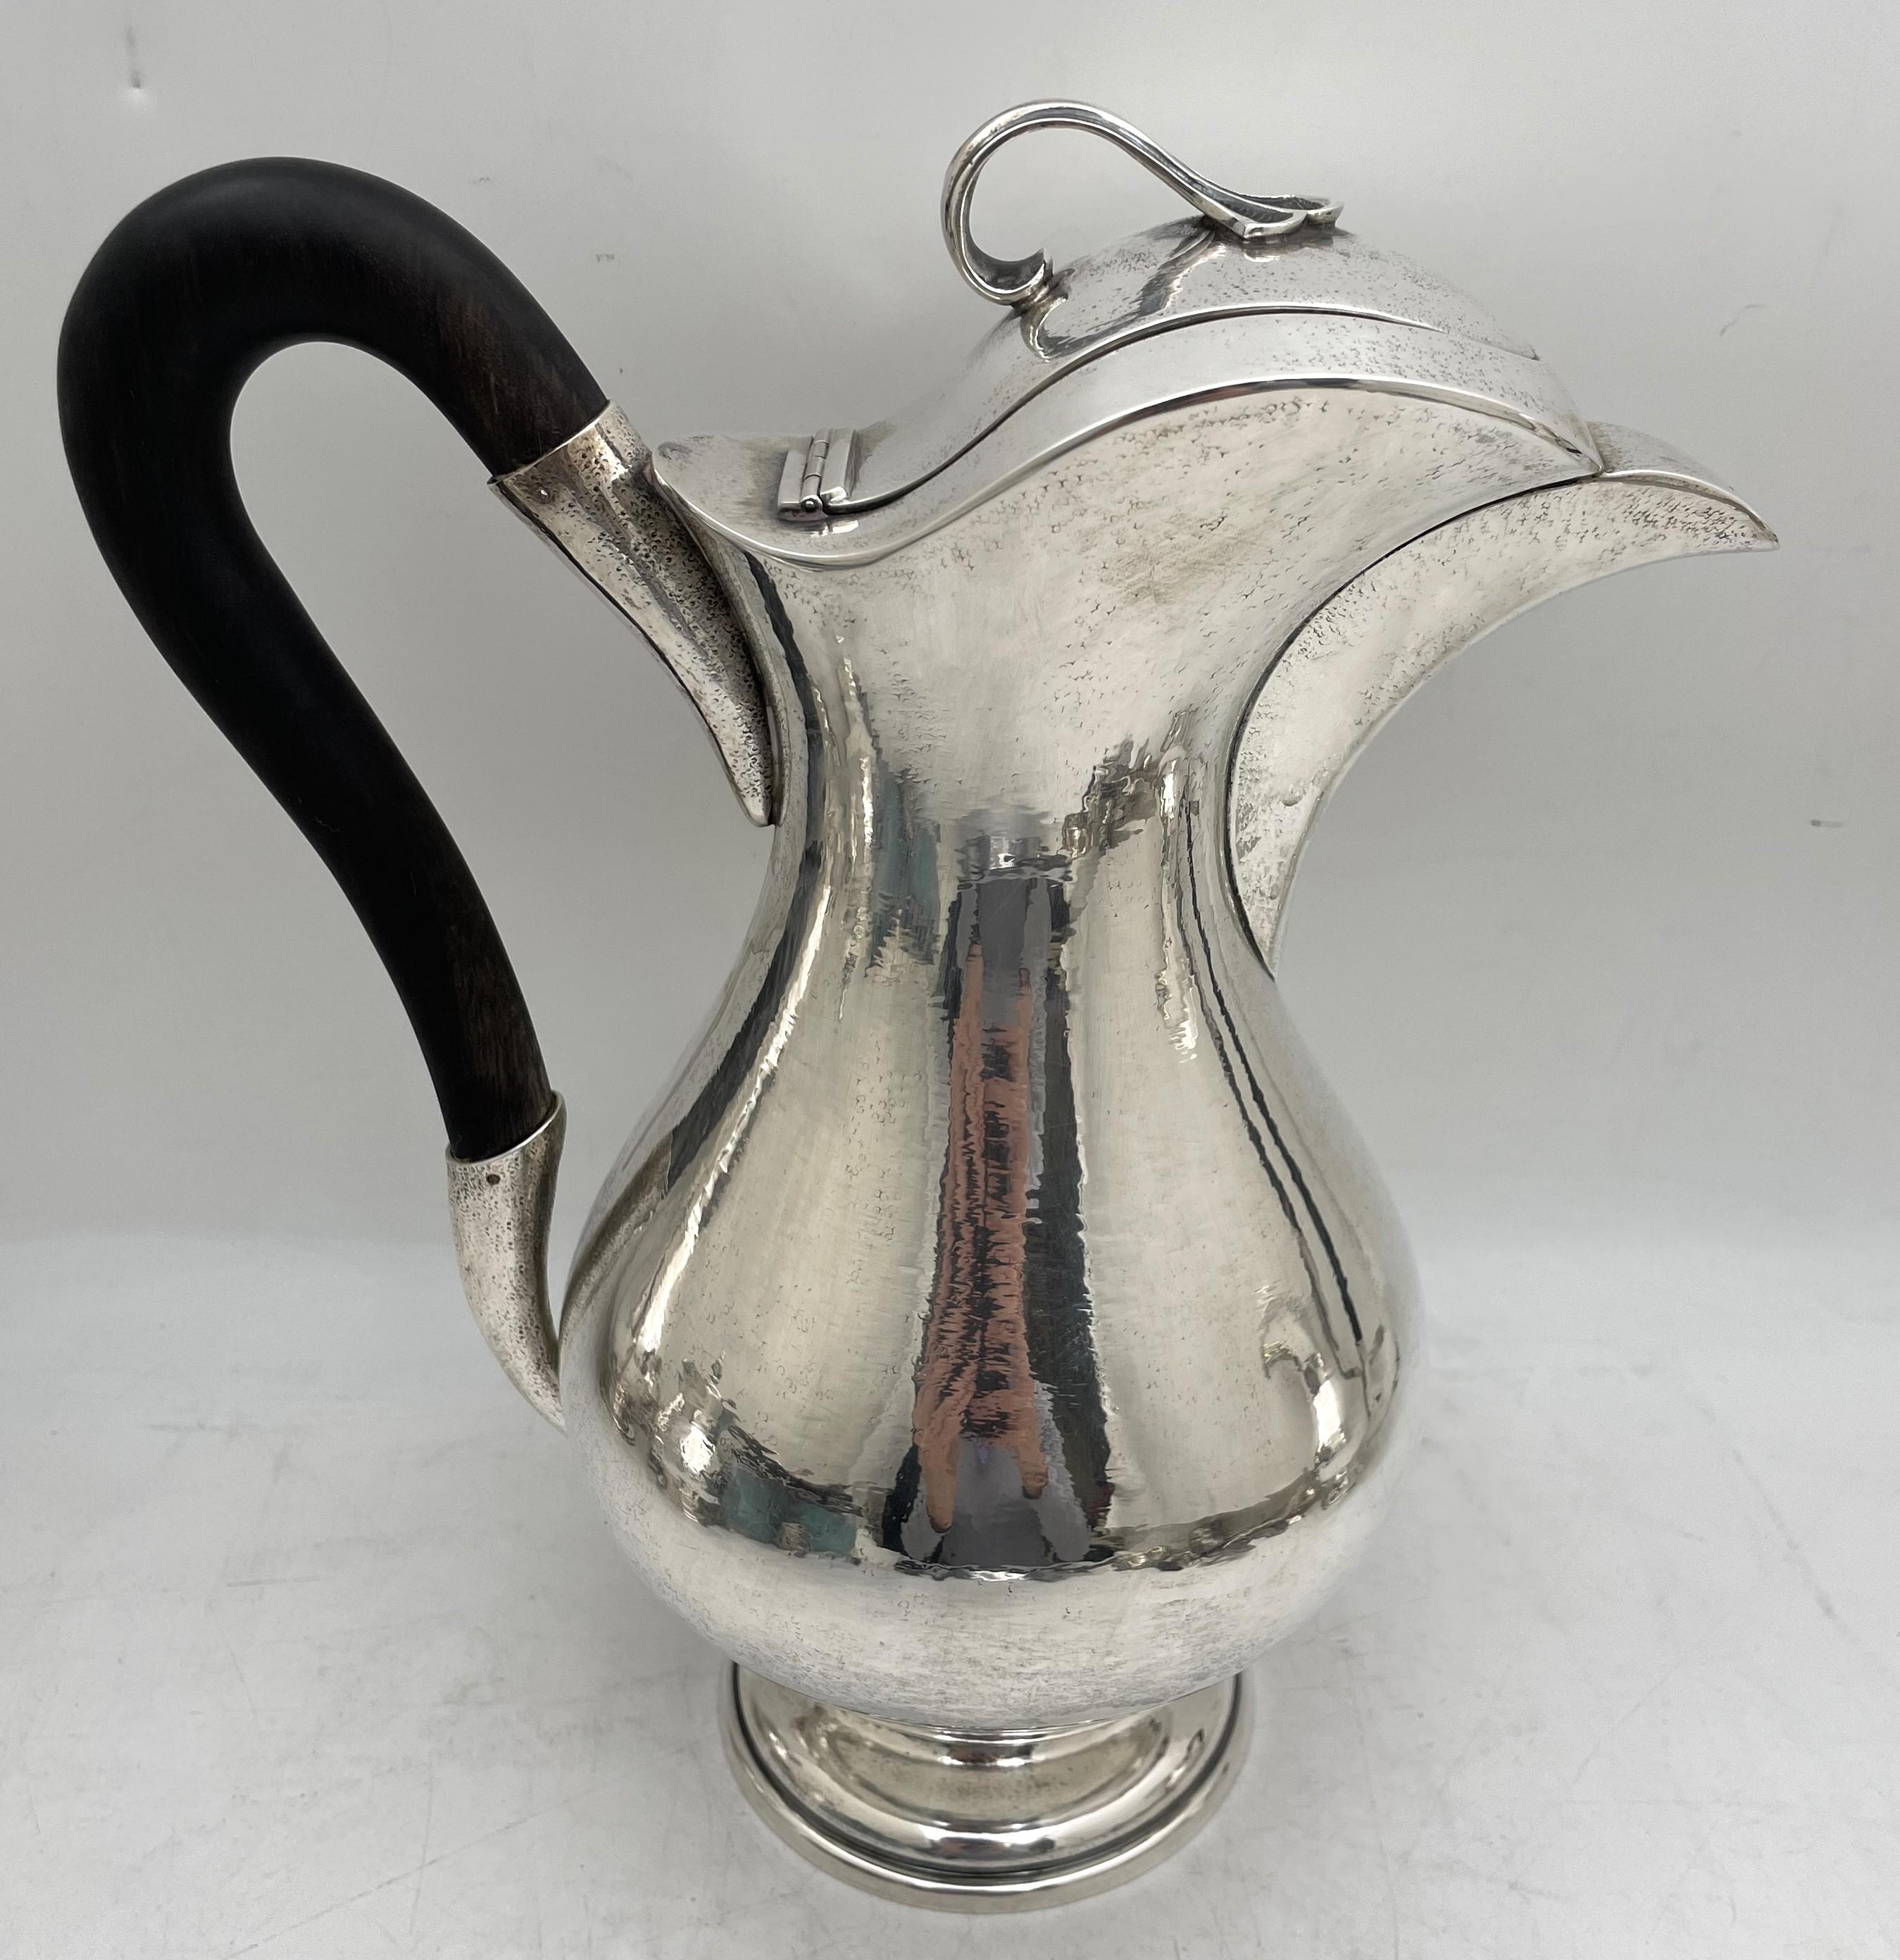 Buccellati sterling silver hand-hammered 4-piece tea and coffee set, beautifully adorned with stylized, geometric finials, consisting of:

- a coffee pot measuring 11 1/4'' in height by 9 3/4'' from handle to spout

- a tea pot measuring 9 2/3'' in